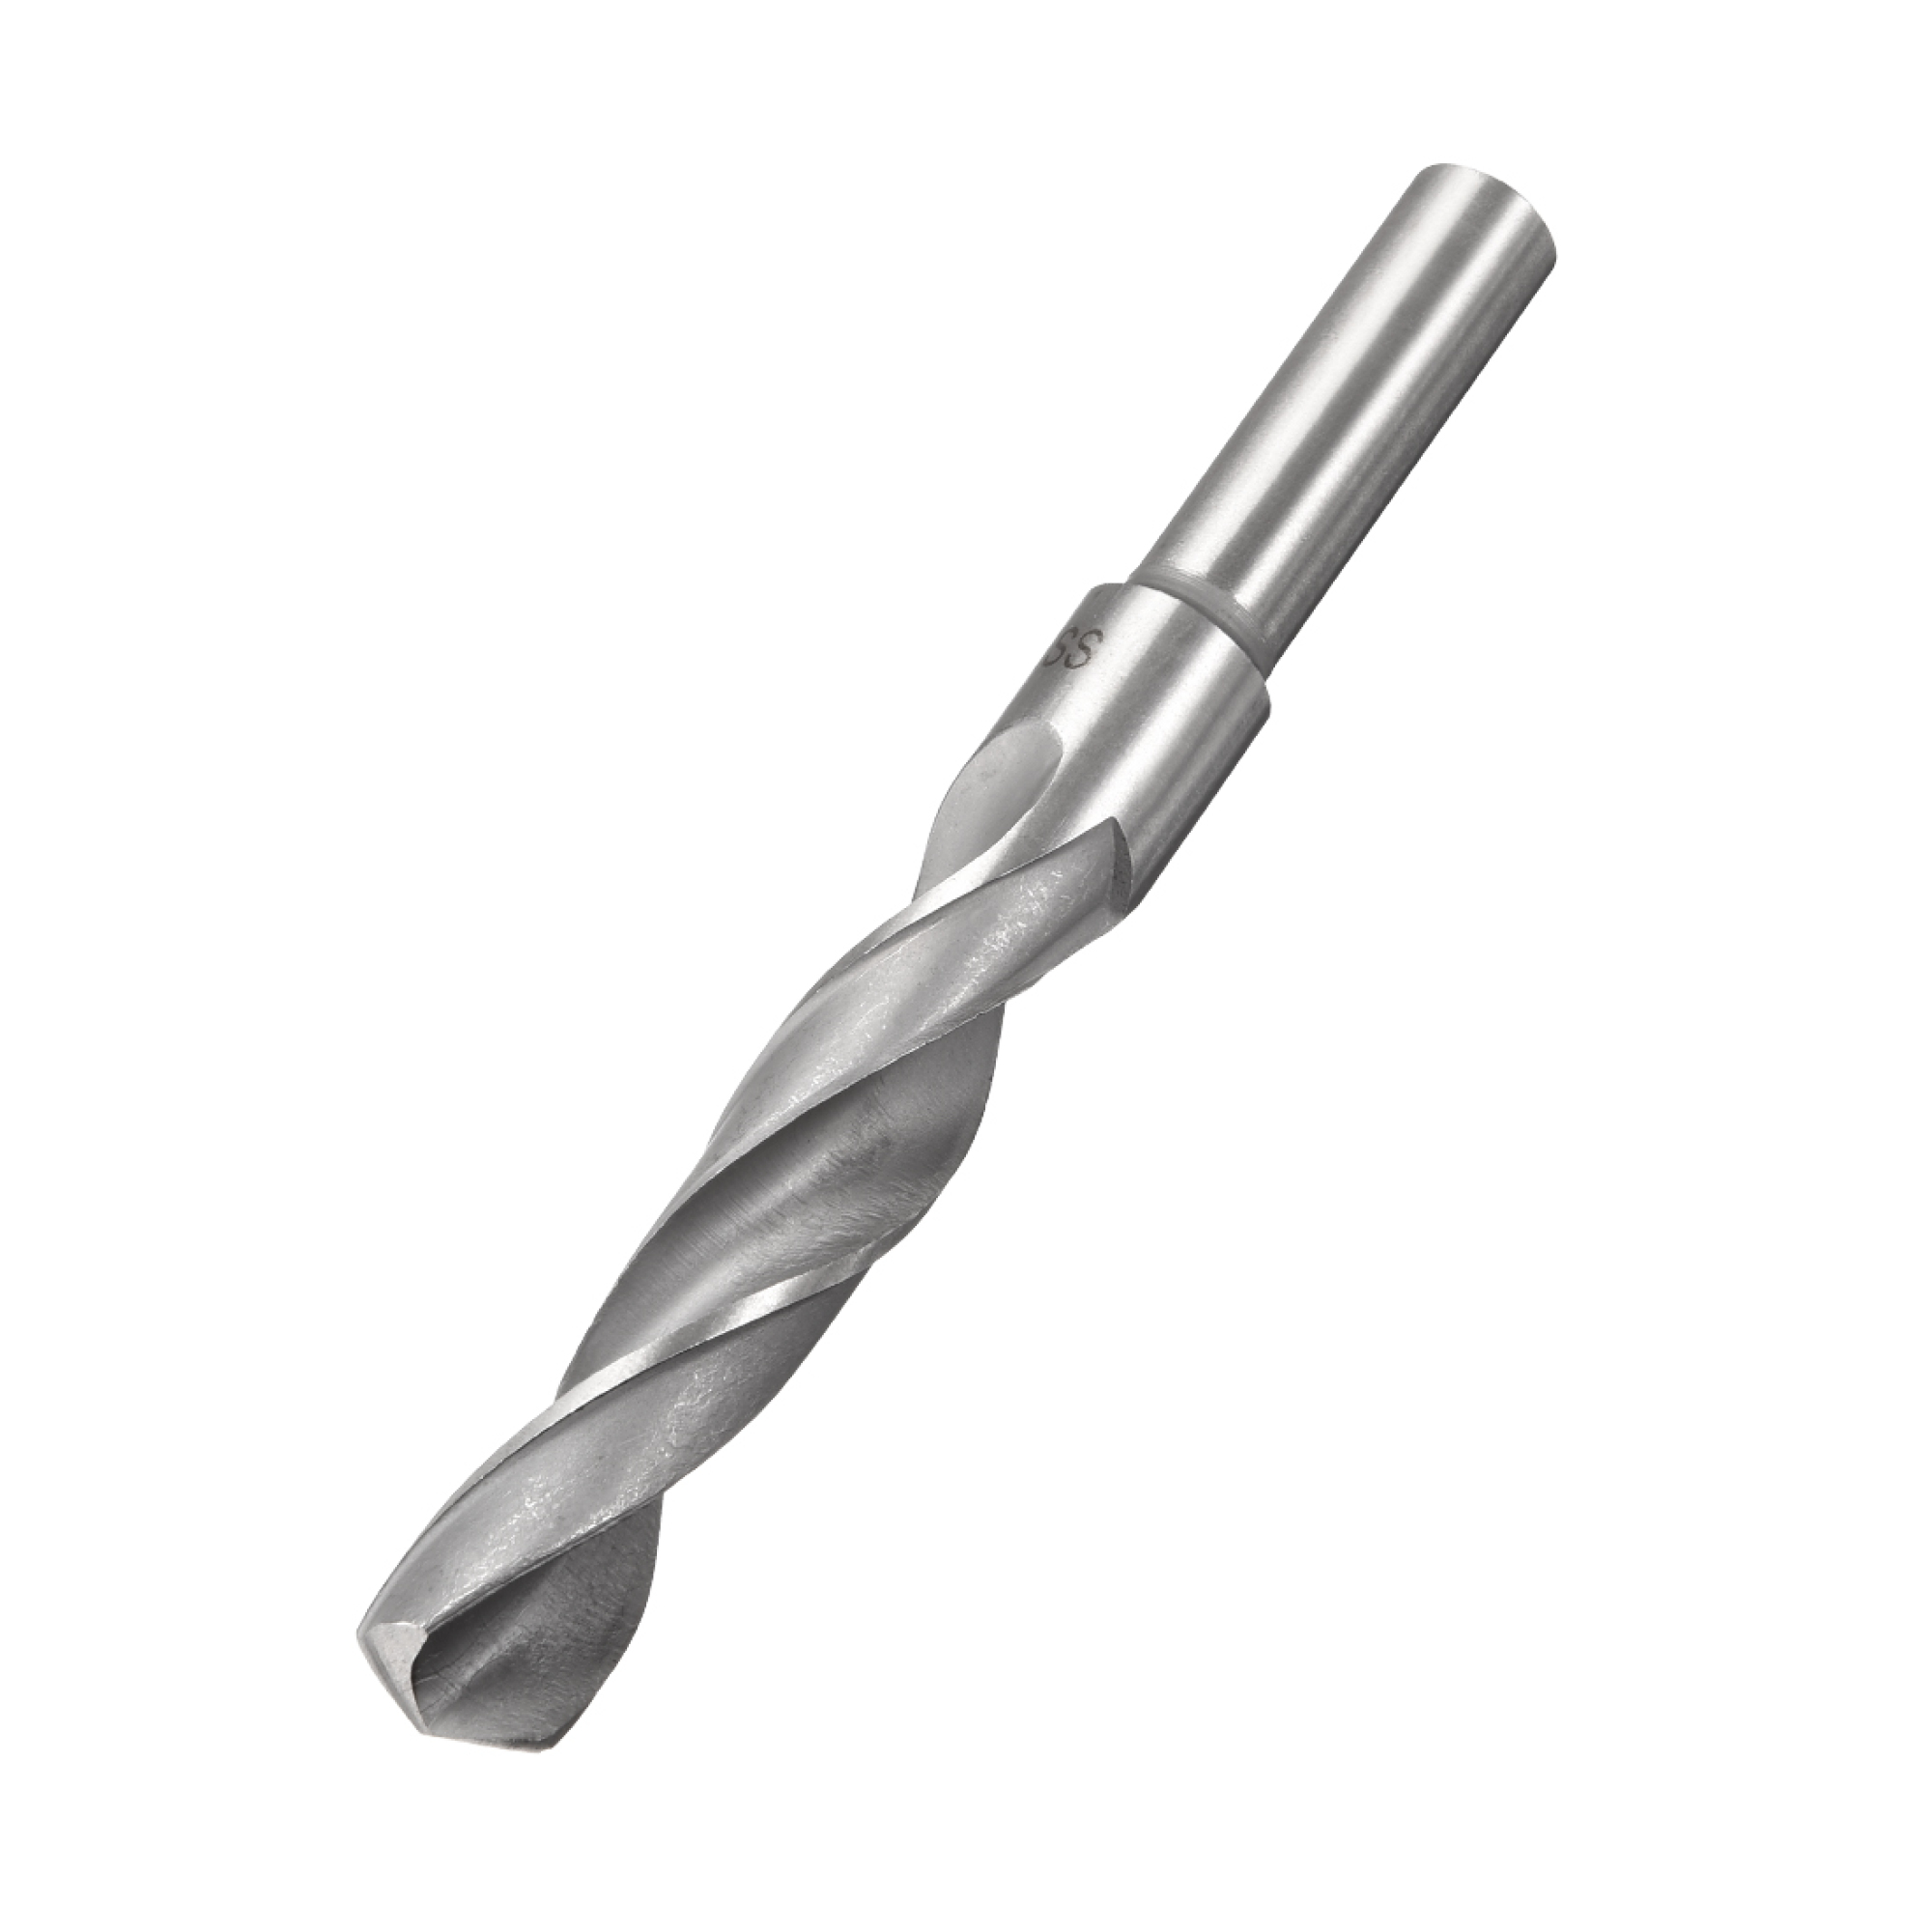 HSS Reduced Shank Drill Bit with 1/2-Inch Shank